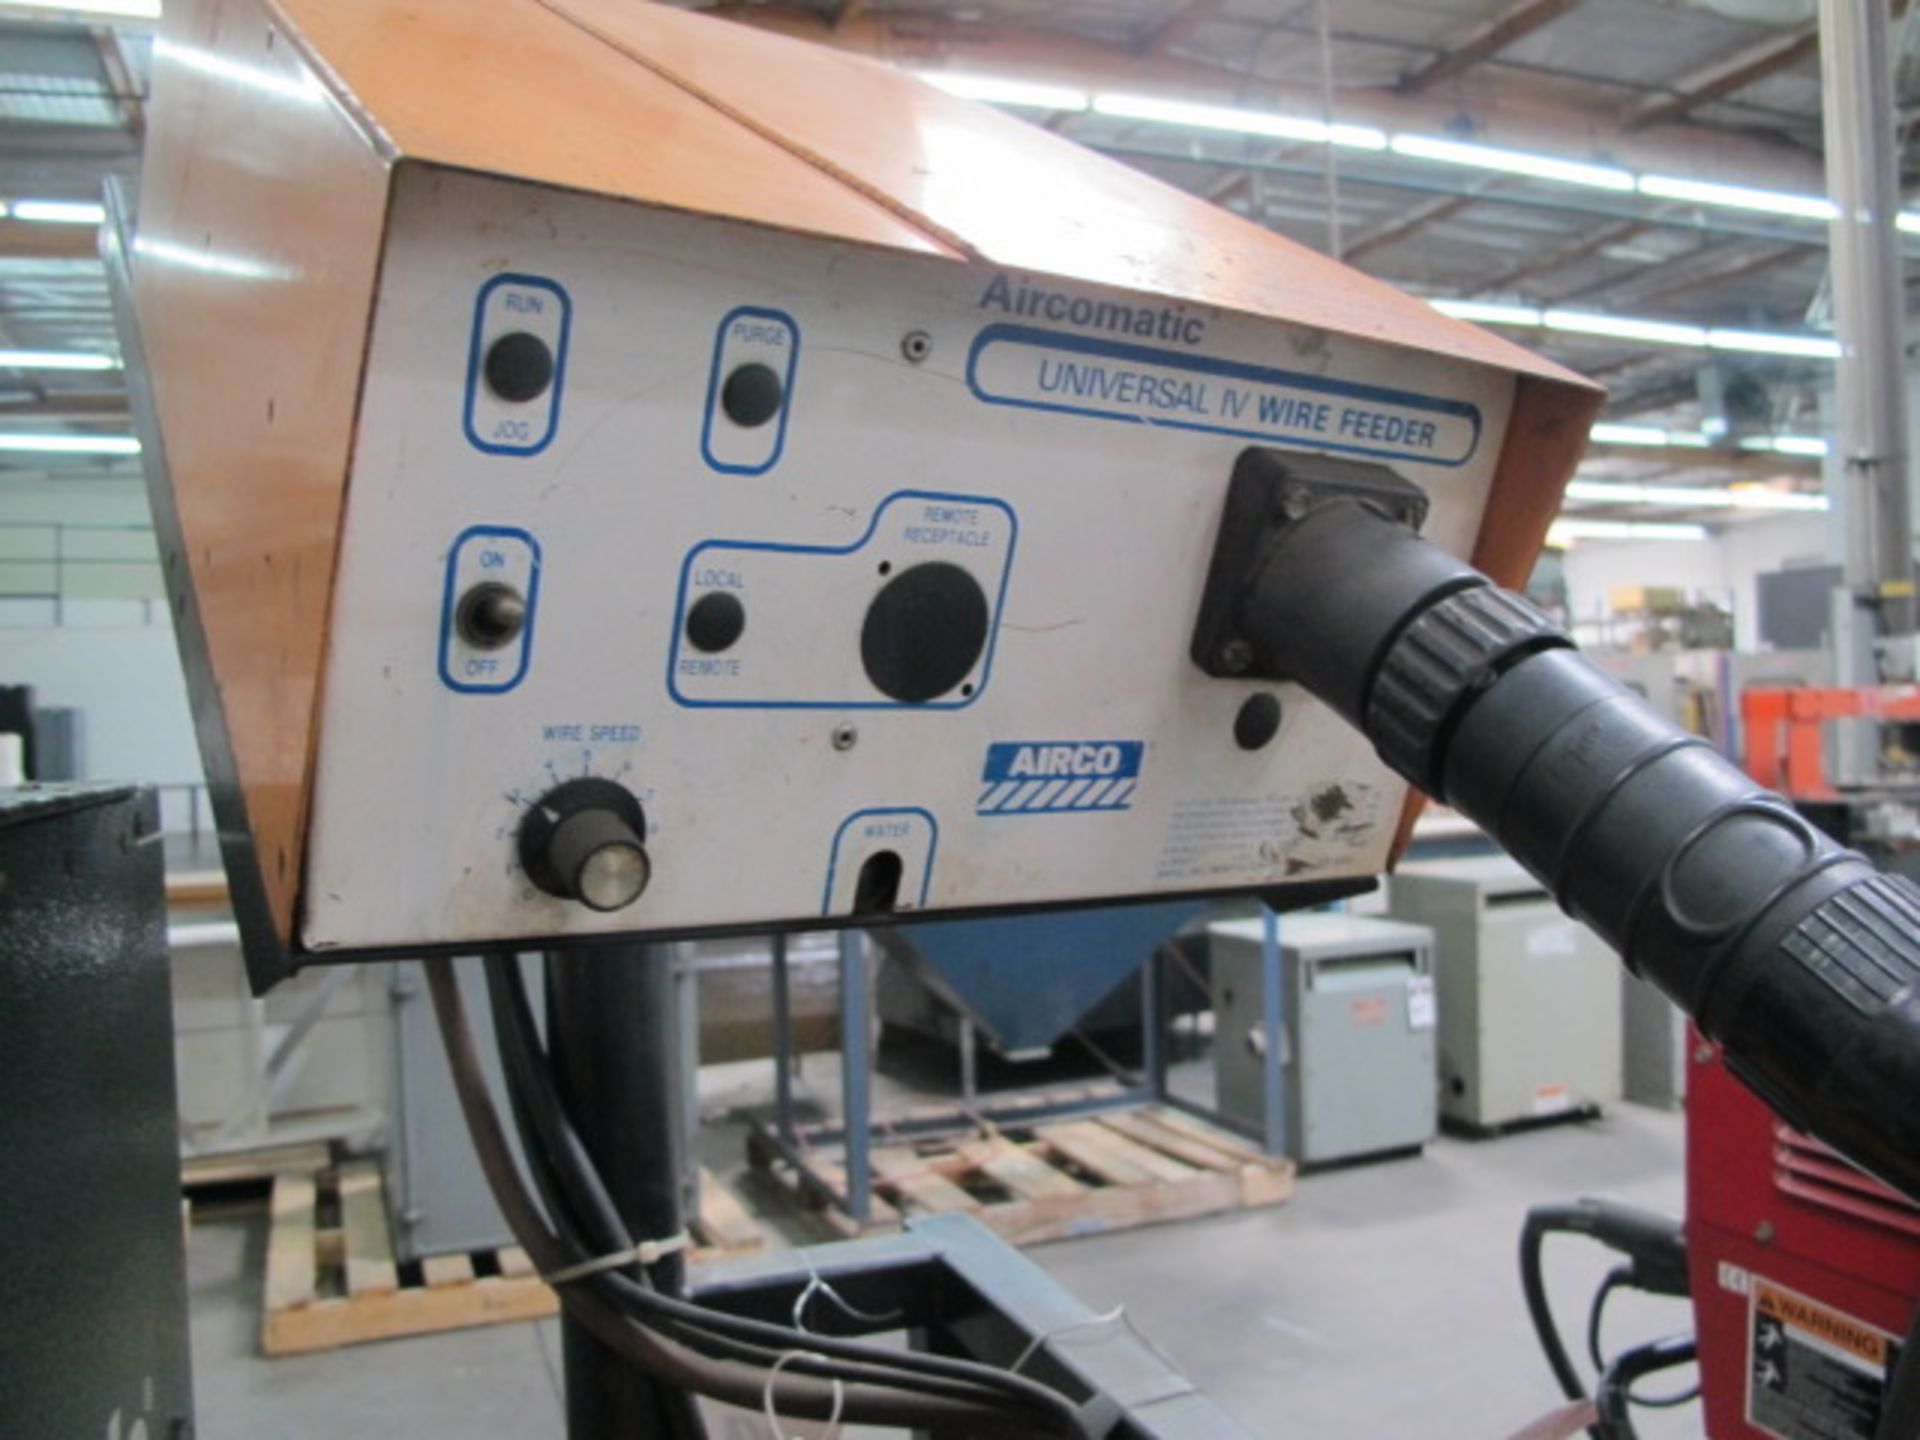 Airco PhaseArc 350 CV-DC Arc Welding Power Source w/ MK Cobramatic Push-Pull GMAW Wire Feeder - Image 4 of 4